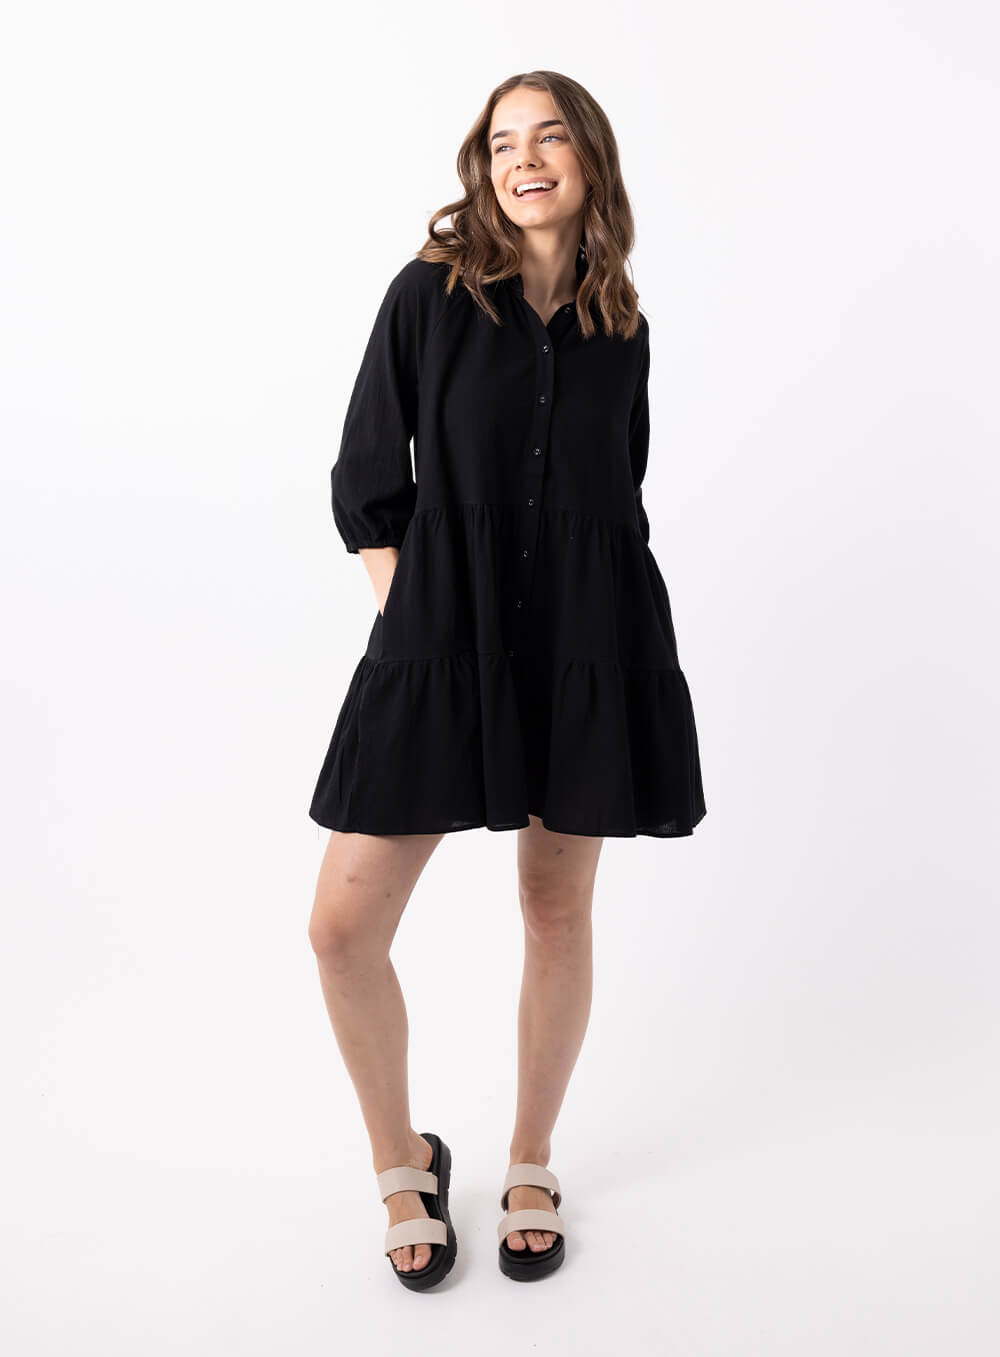 The Jasmine Dress in black is made of 100% soft cotton, featuring a collar neck, 3/4 sleeve with elastic cuff button through front all the way to the hem, tiered layers through the body, midi in length and 2 side pockets